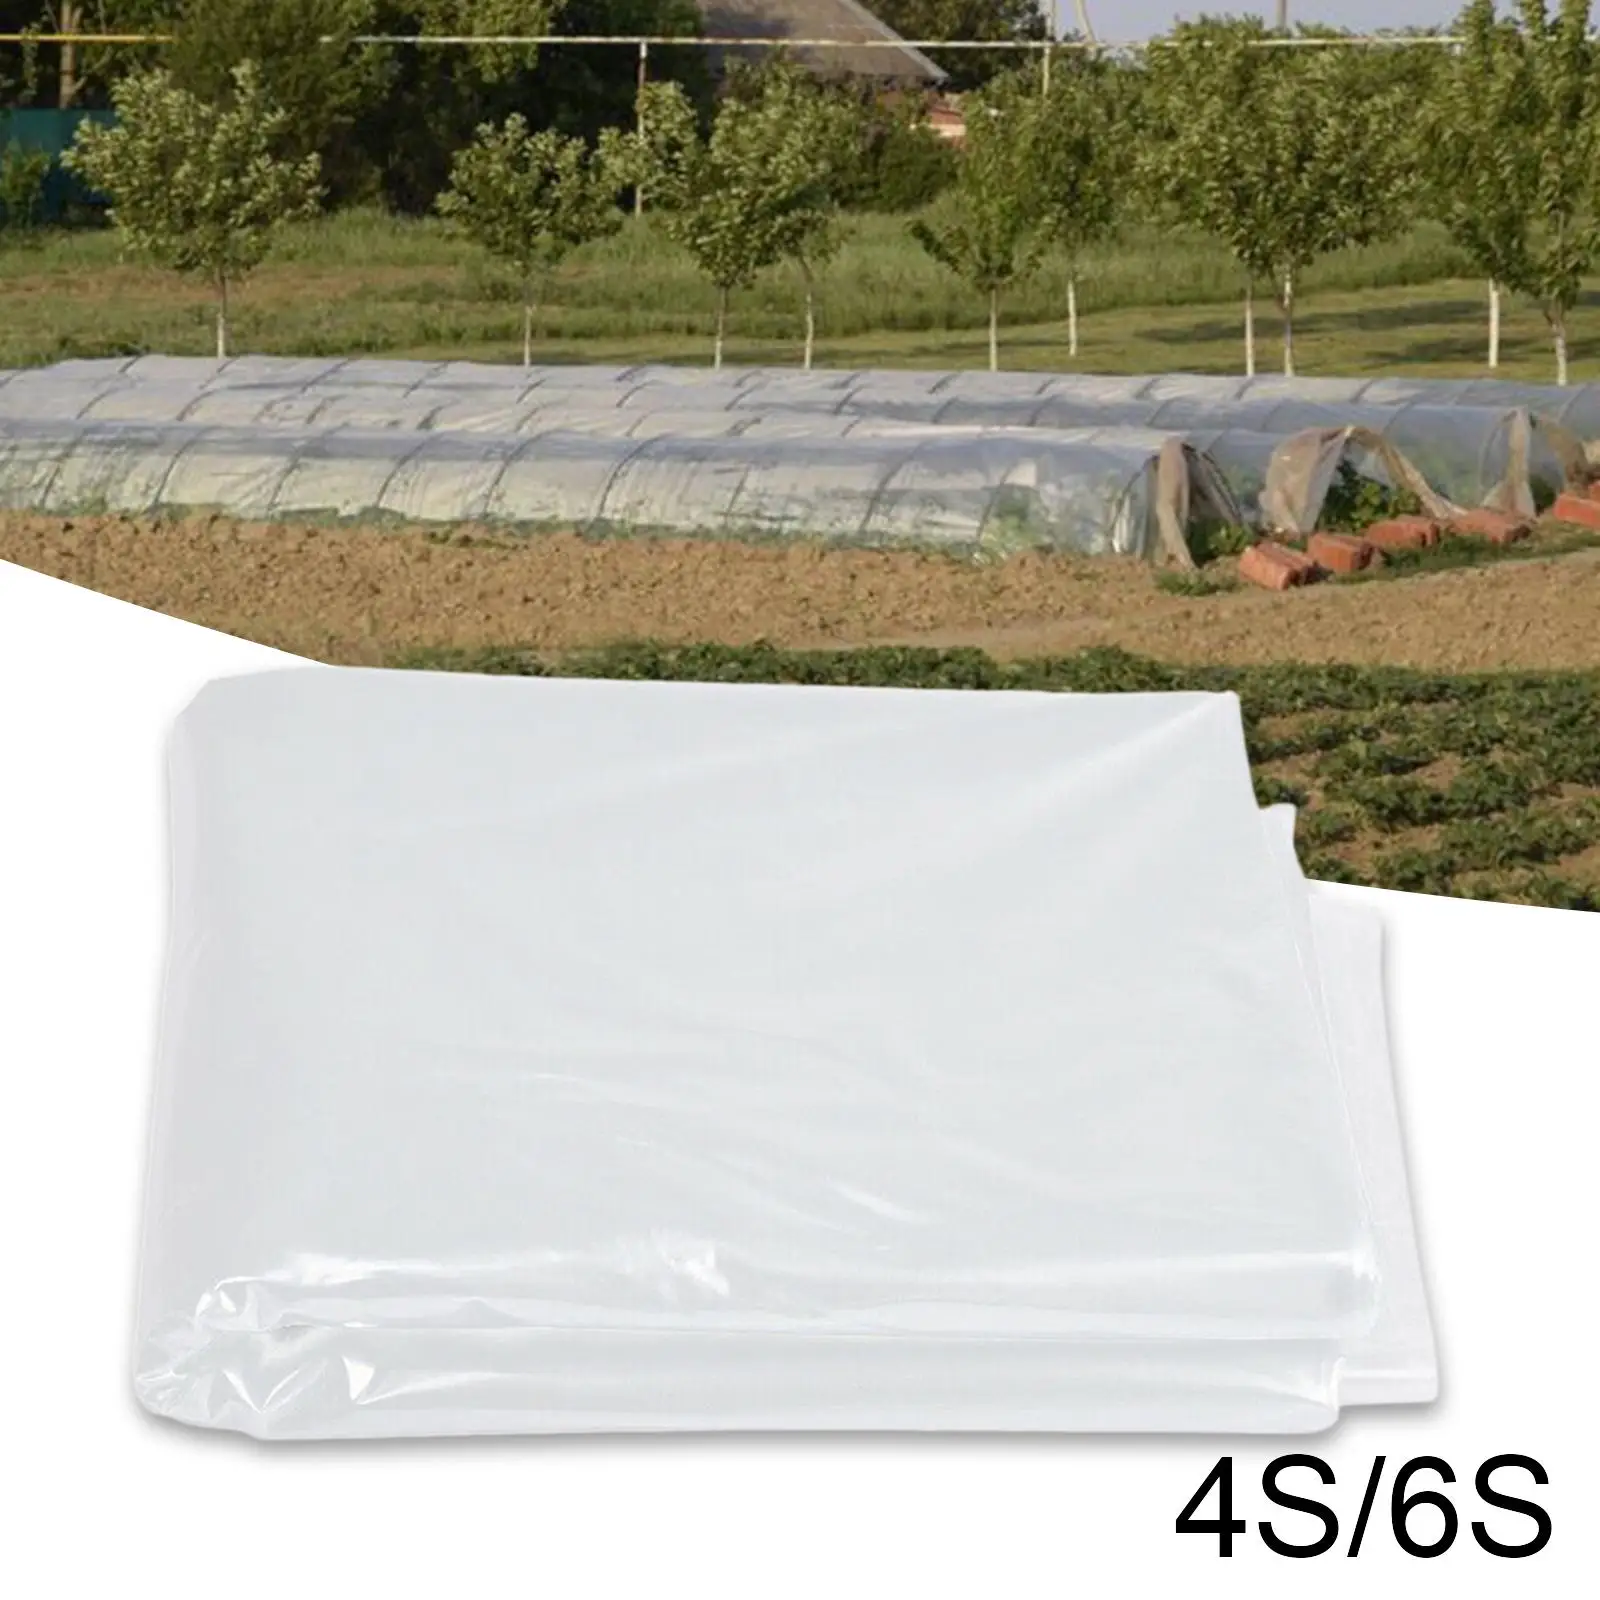 Clear Greenhouse Film Green House Hoop Growing Tents Keep Warm Polyethylene Film, Sheeting Cover, for Garden Greenhouse Farm